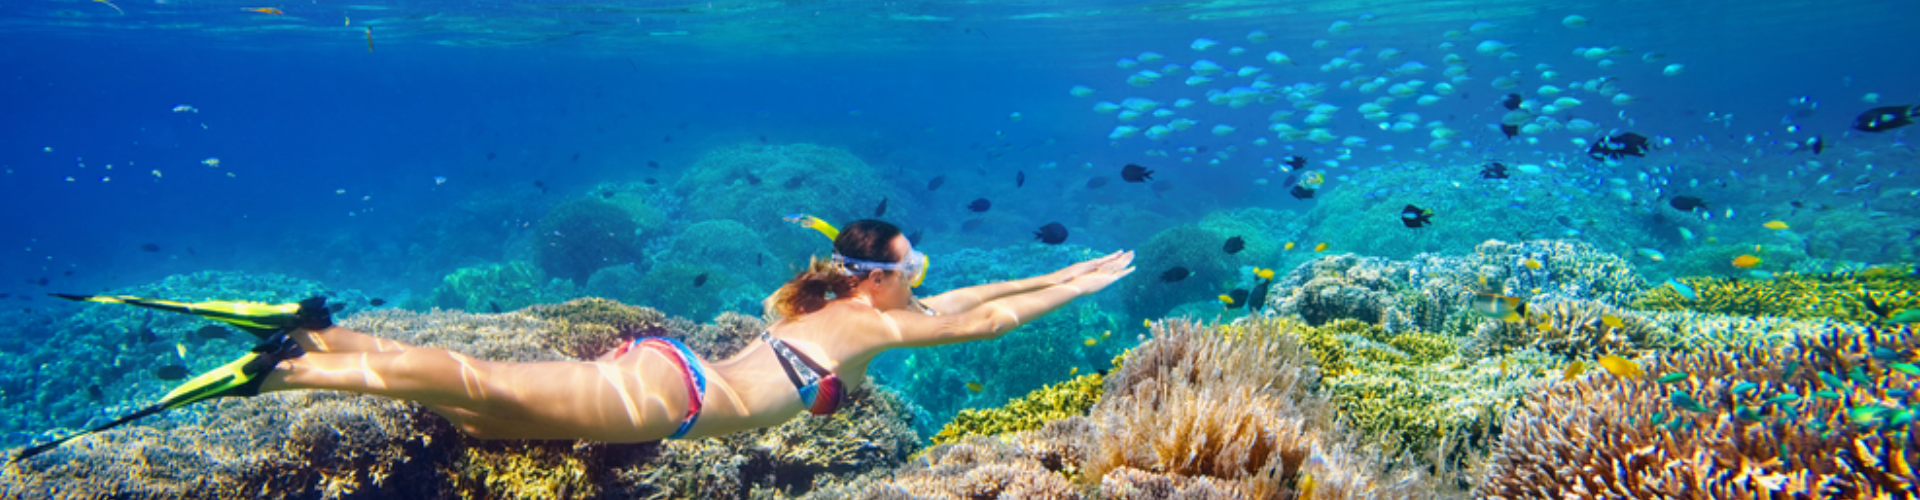 Hurghada: Diving or Snorkeling Boat Tour with Lunch & Drinks